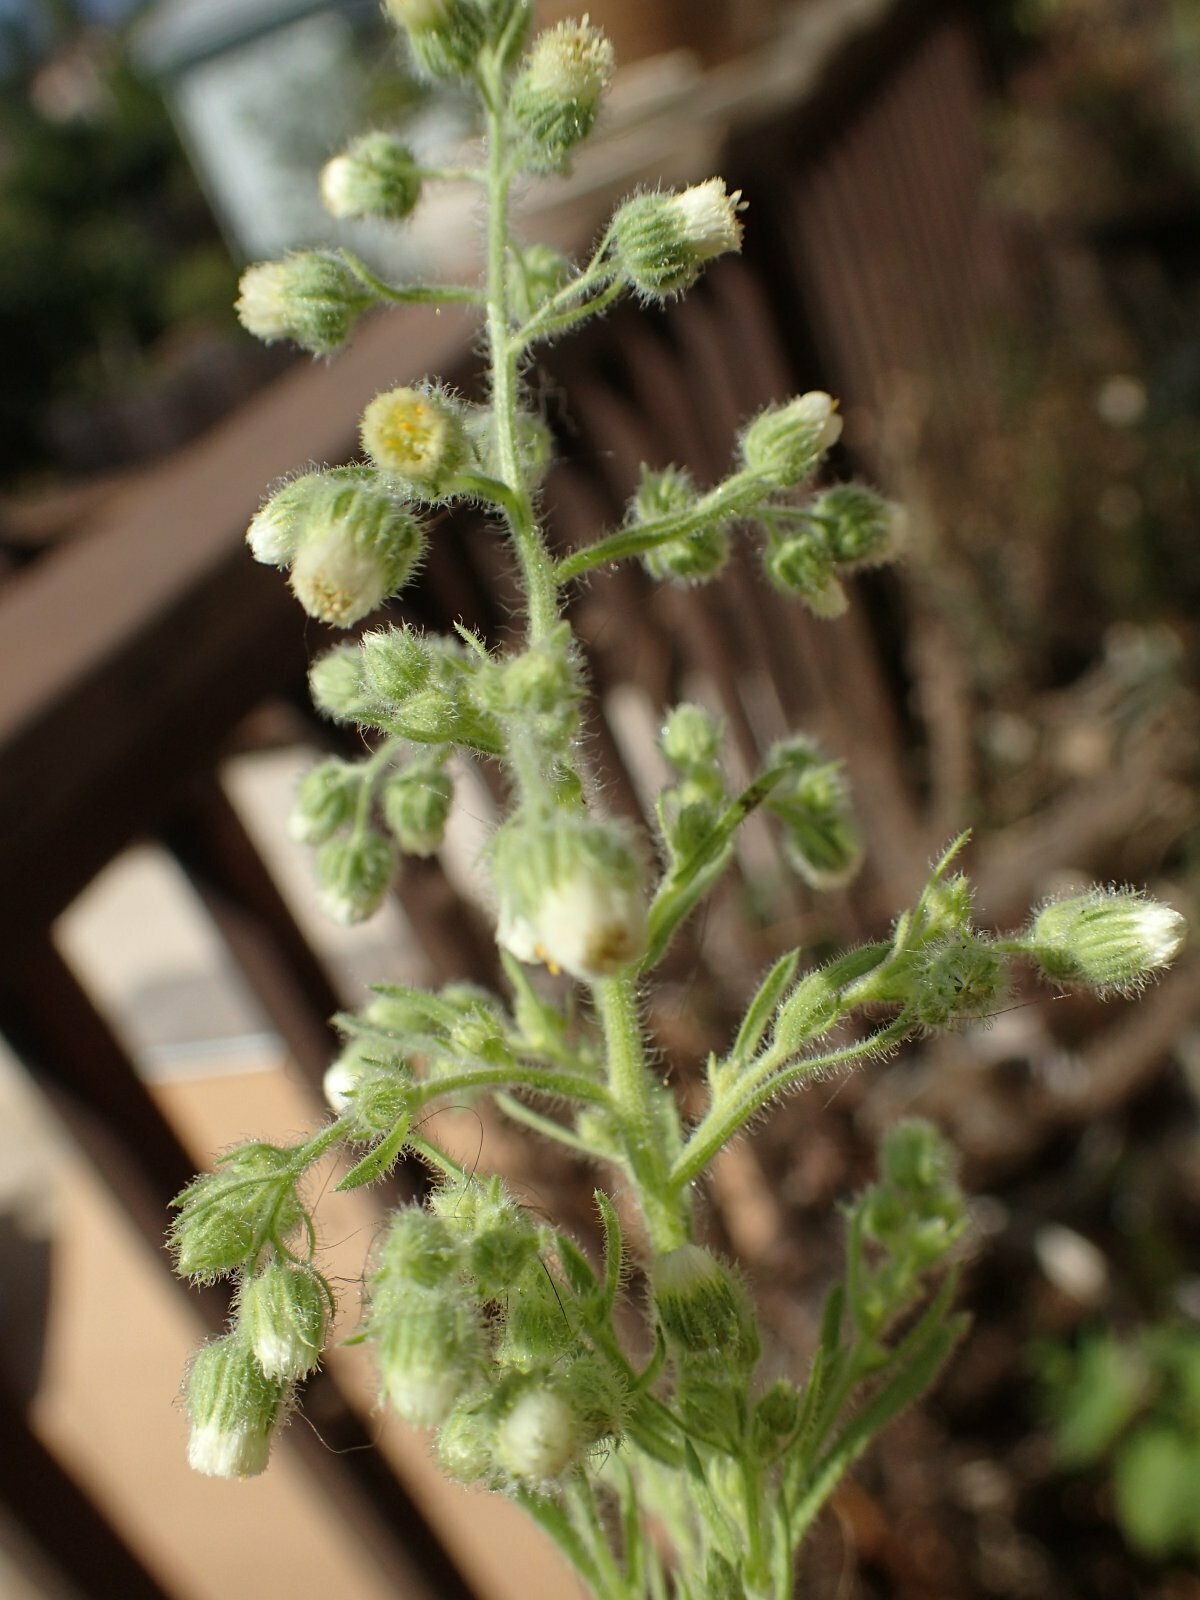 High Resolution Laennecia coulteri Flower